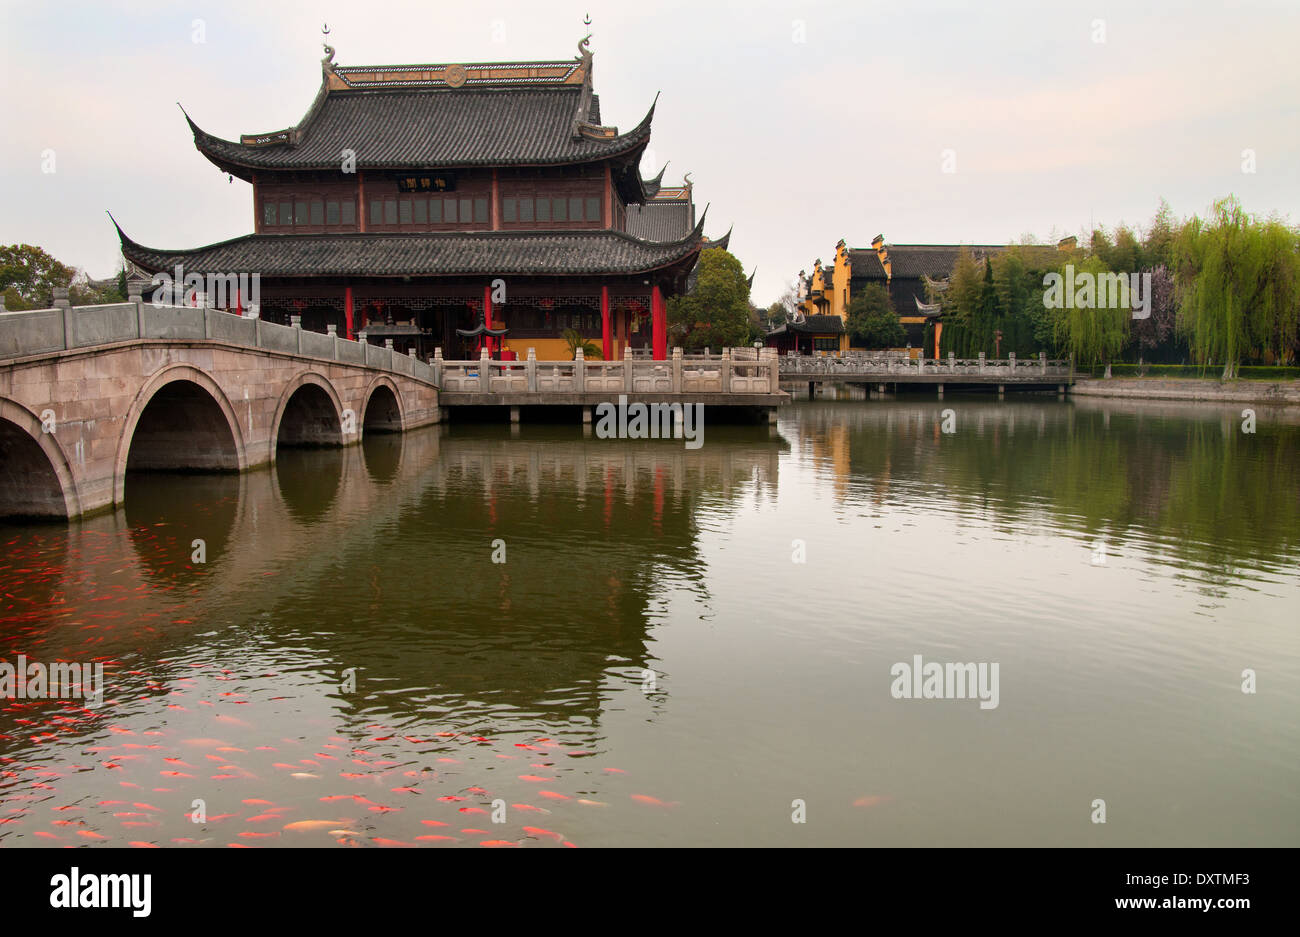 The view across the channel of the pagoda and bridge in old Chinese village. Stock Photo